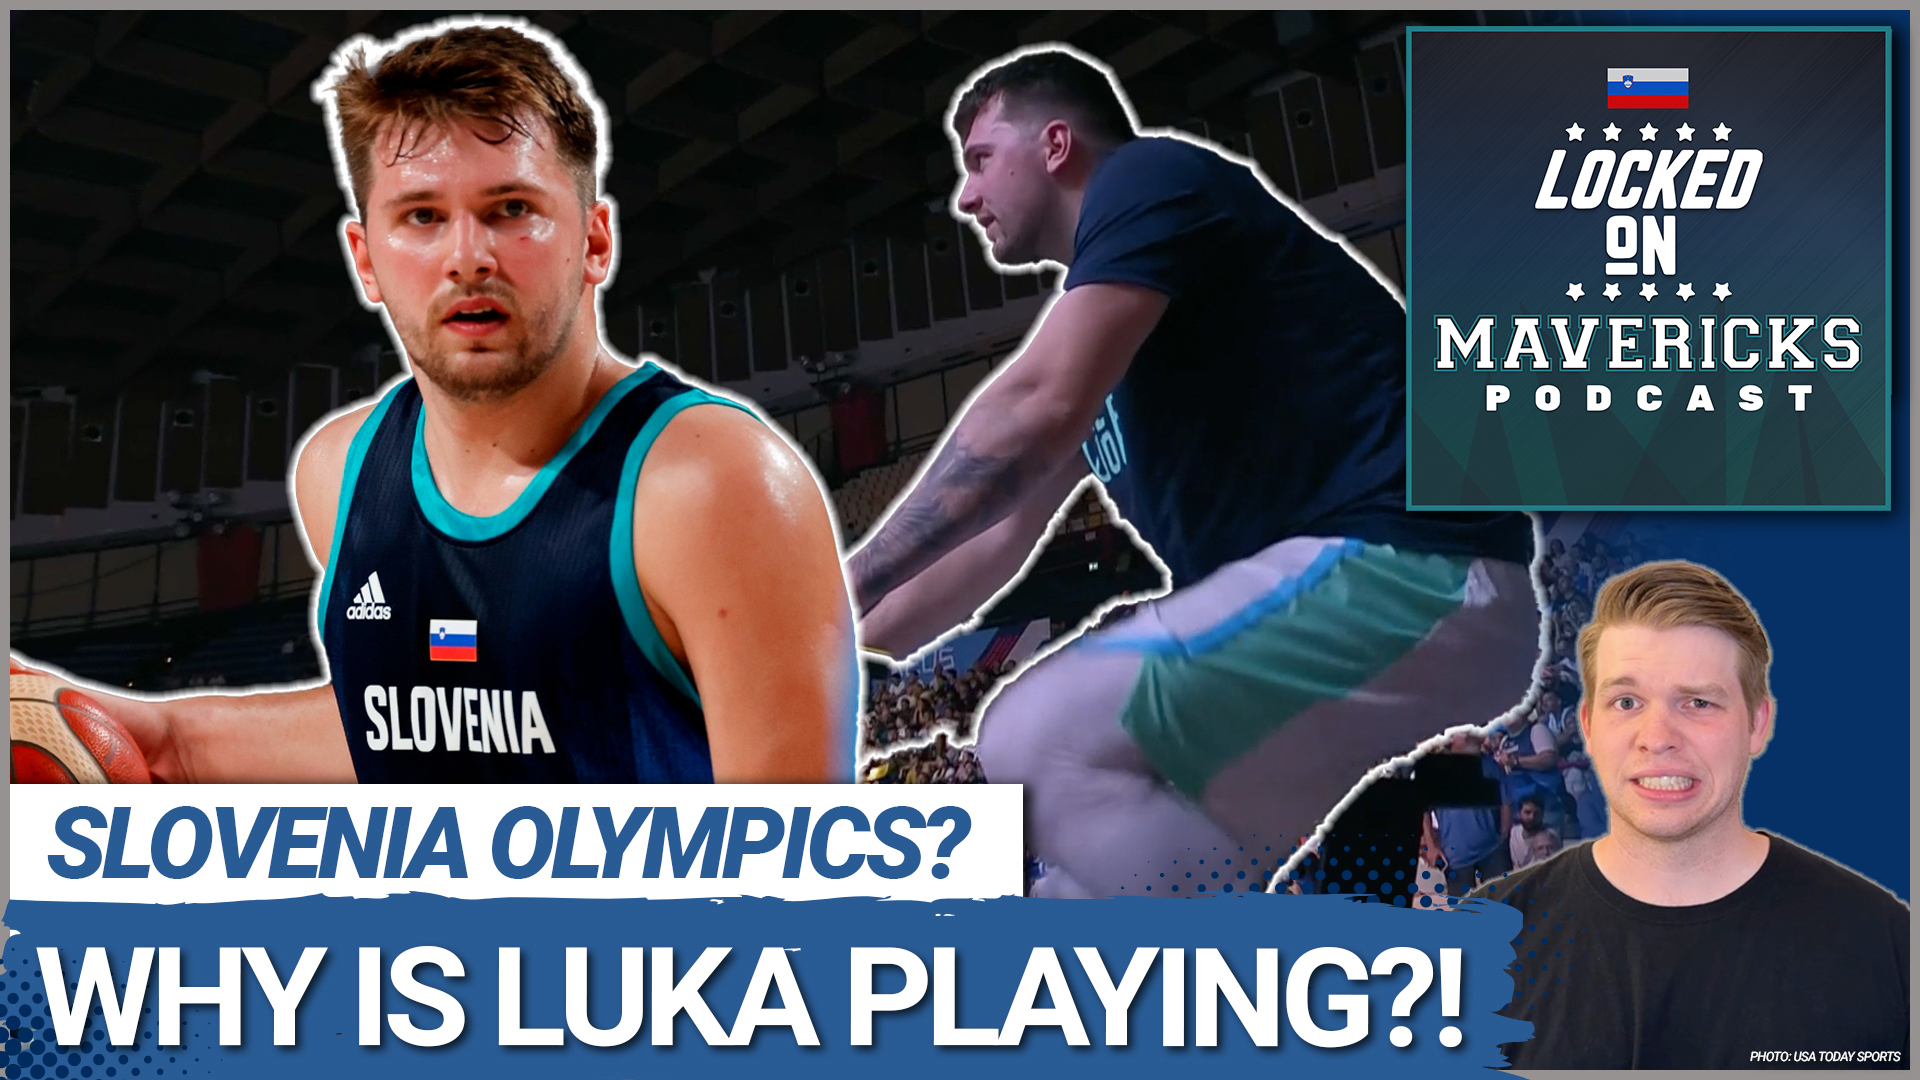 Nick Angstadt discusses Luka Dončić's commitment to playing for Slovenia in the Olympic qualifiers, despite the concerns of Mavericks fans.